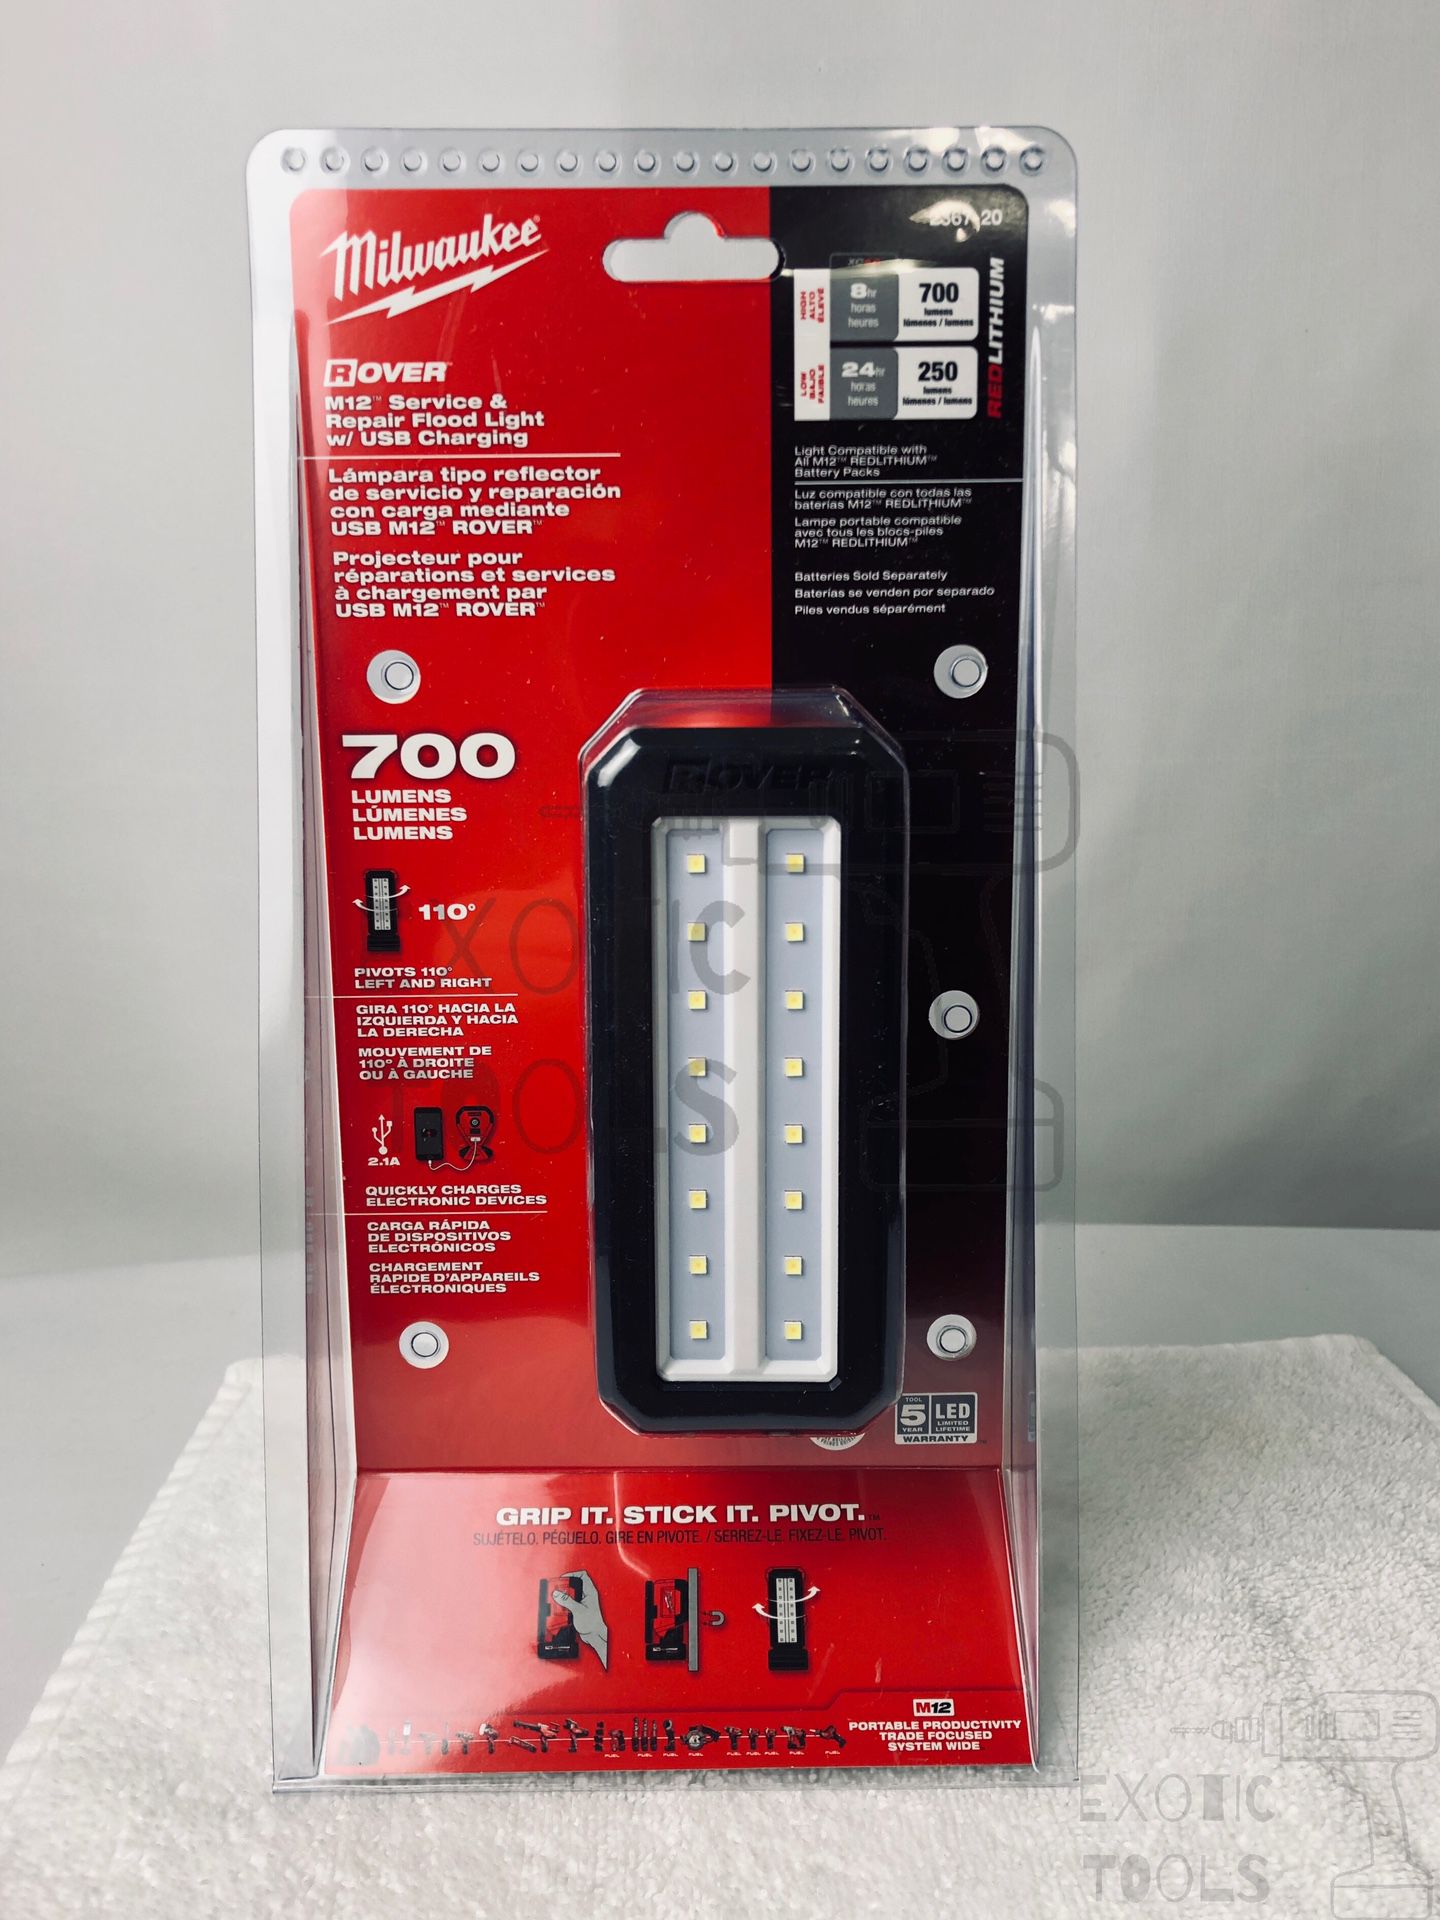 New Milwaukee Tools M12 ROVER Service Repair Flood Light w/ USB Charging  for Sale in Mooresville, NC OfferUp